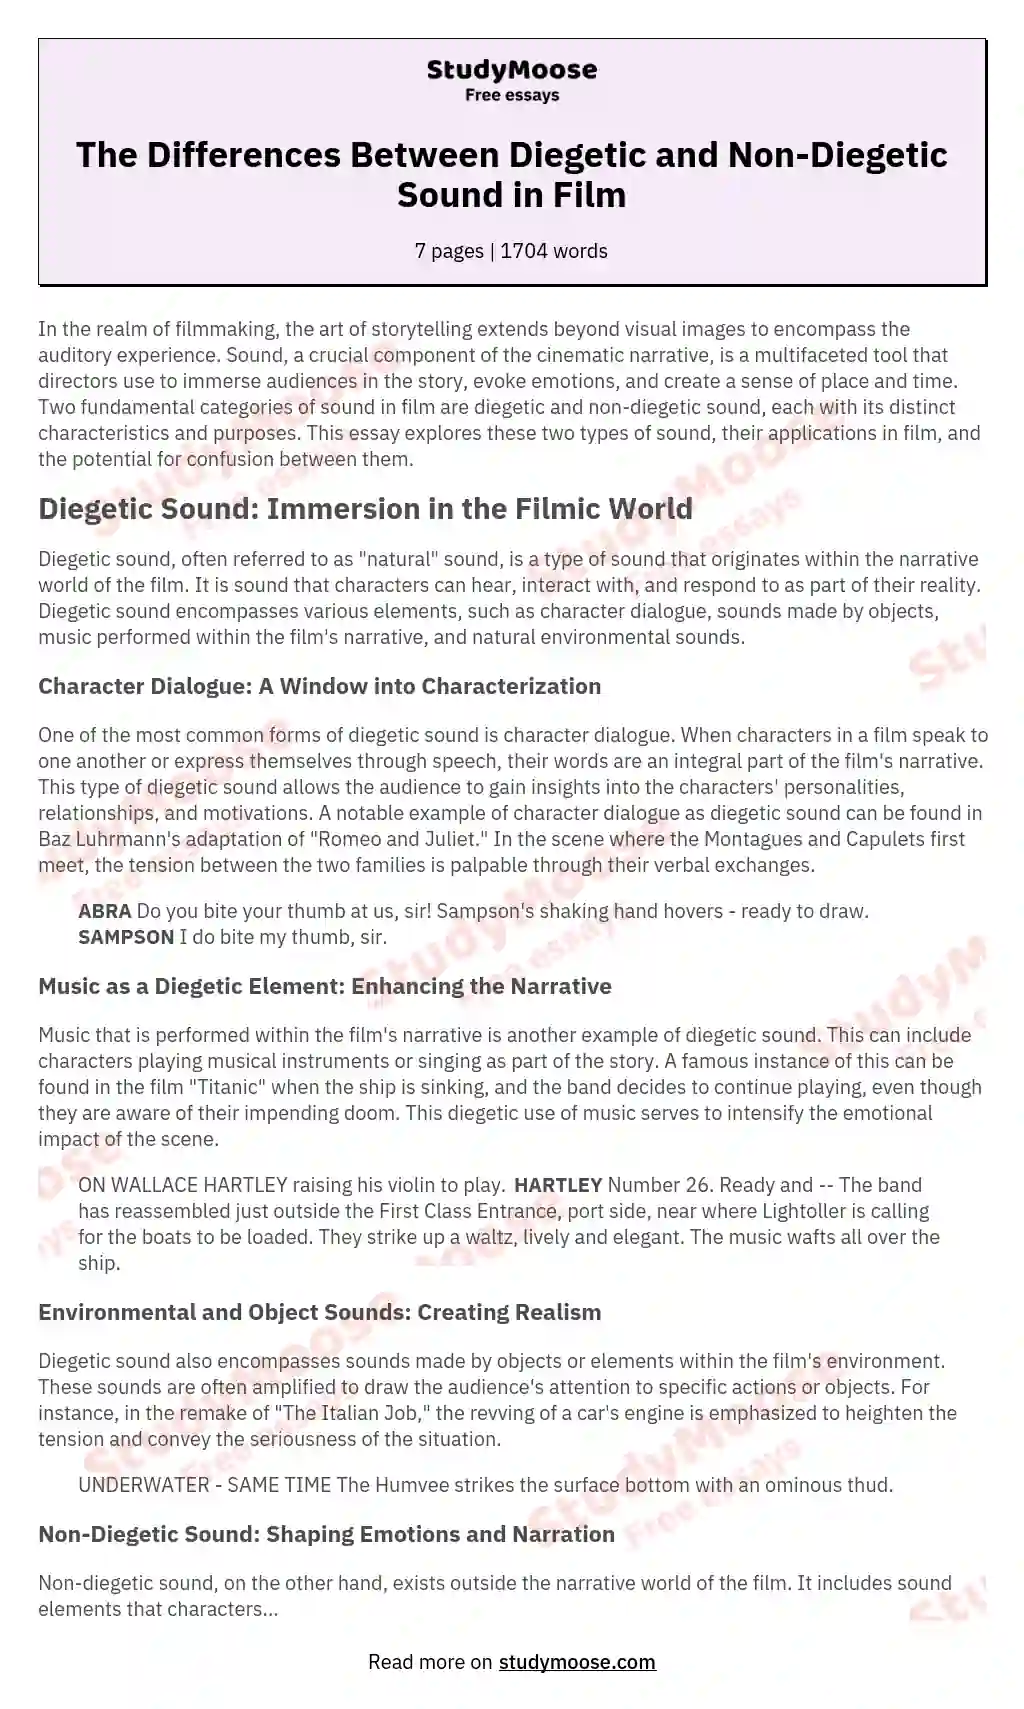 The Differences Between Diegetic and Non-Diegetic Sound in Film essay